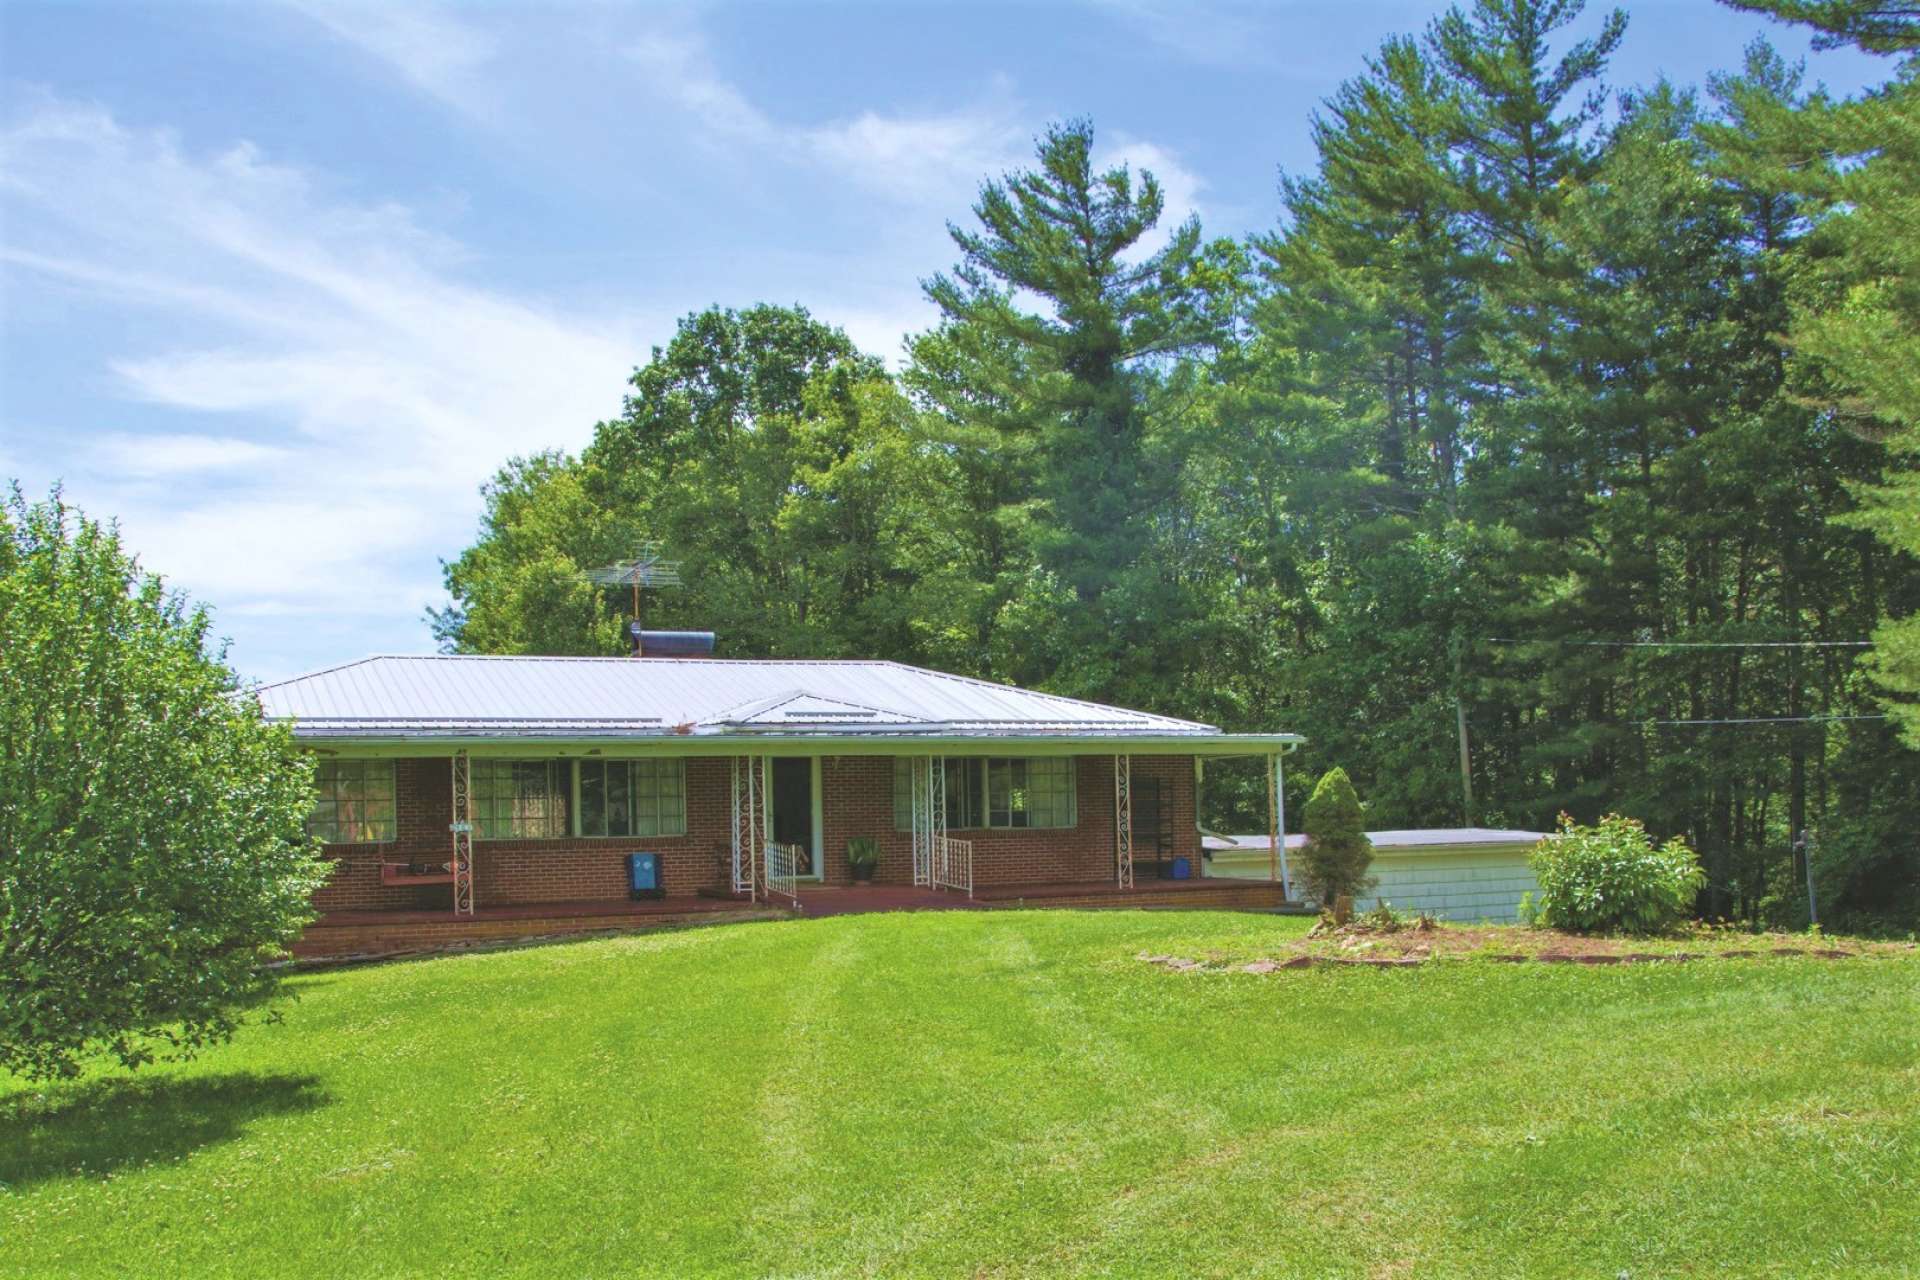 Offered at only $249,900, this 26+ acre farm with frontage on Bare Creek, fenced pasture, woodlands, and a fixer upper 3-bedroom, 2-bath brick ranch home is located just minutes to Jefferson and West Jefferson and suitable for many farming options, or a cool summer retreat. F165